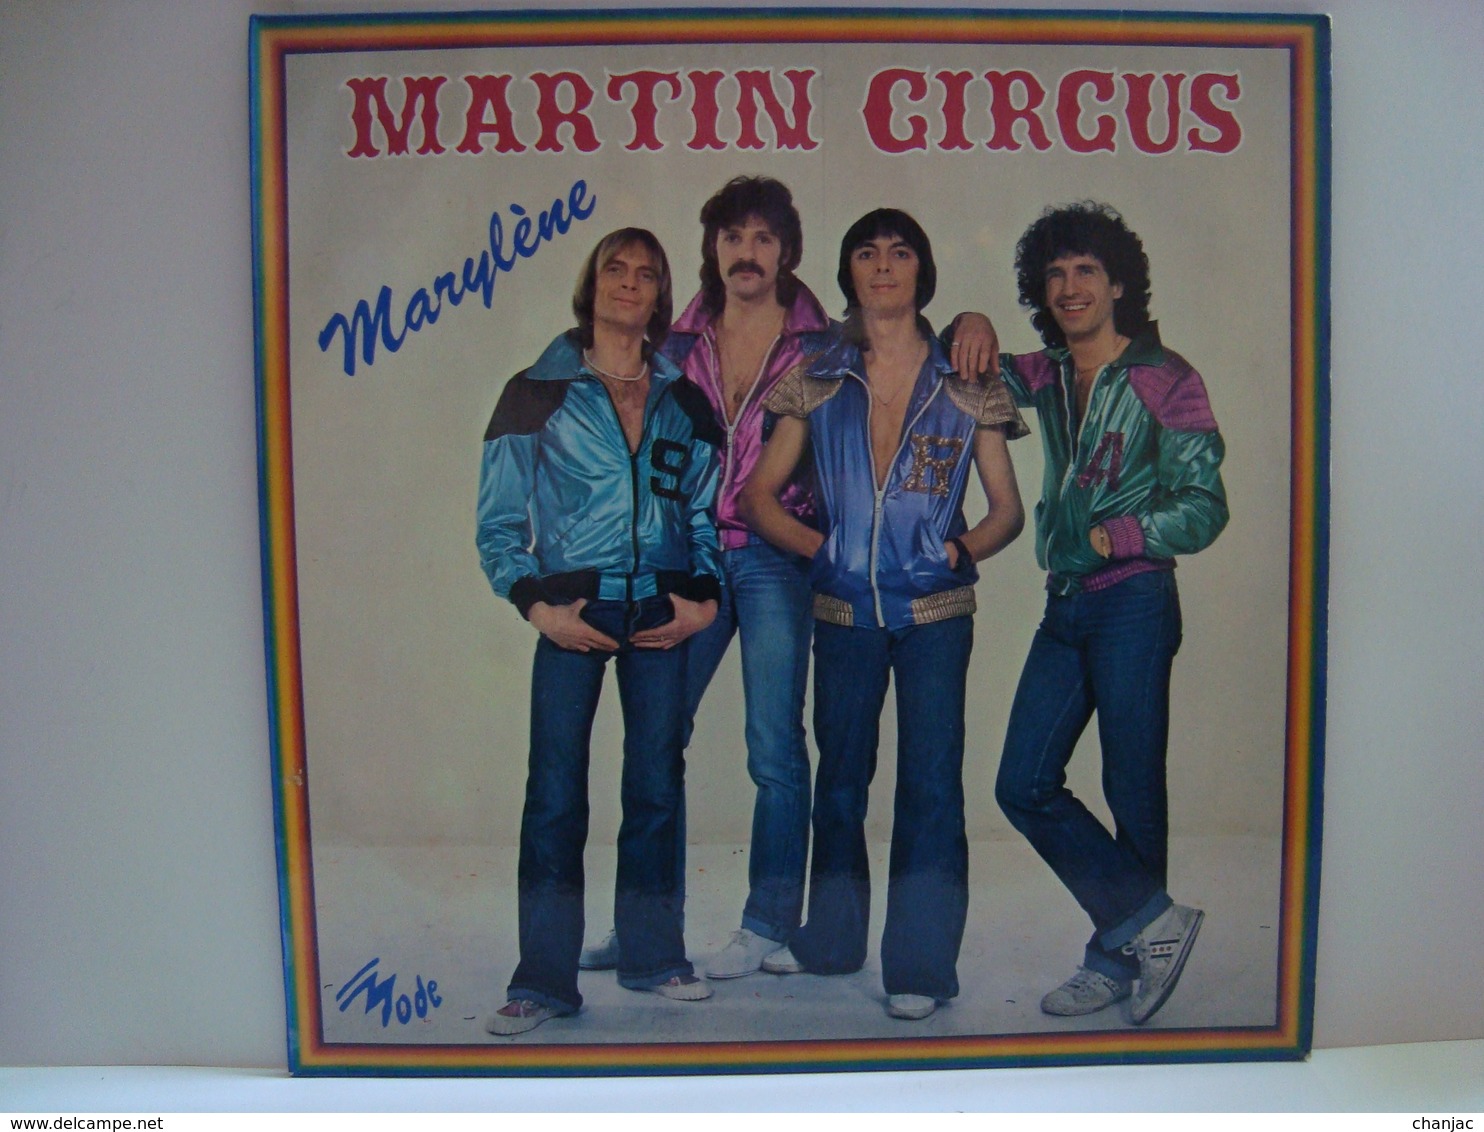 33 Tours: MARTIN CIRCUS - Marylène + 12 (Voir Scan) 1979 Vogue VG 201 MD 9032 - Collector's Editions